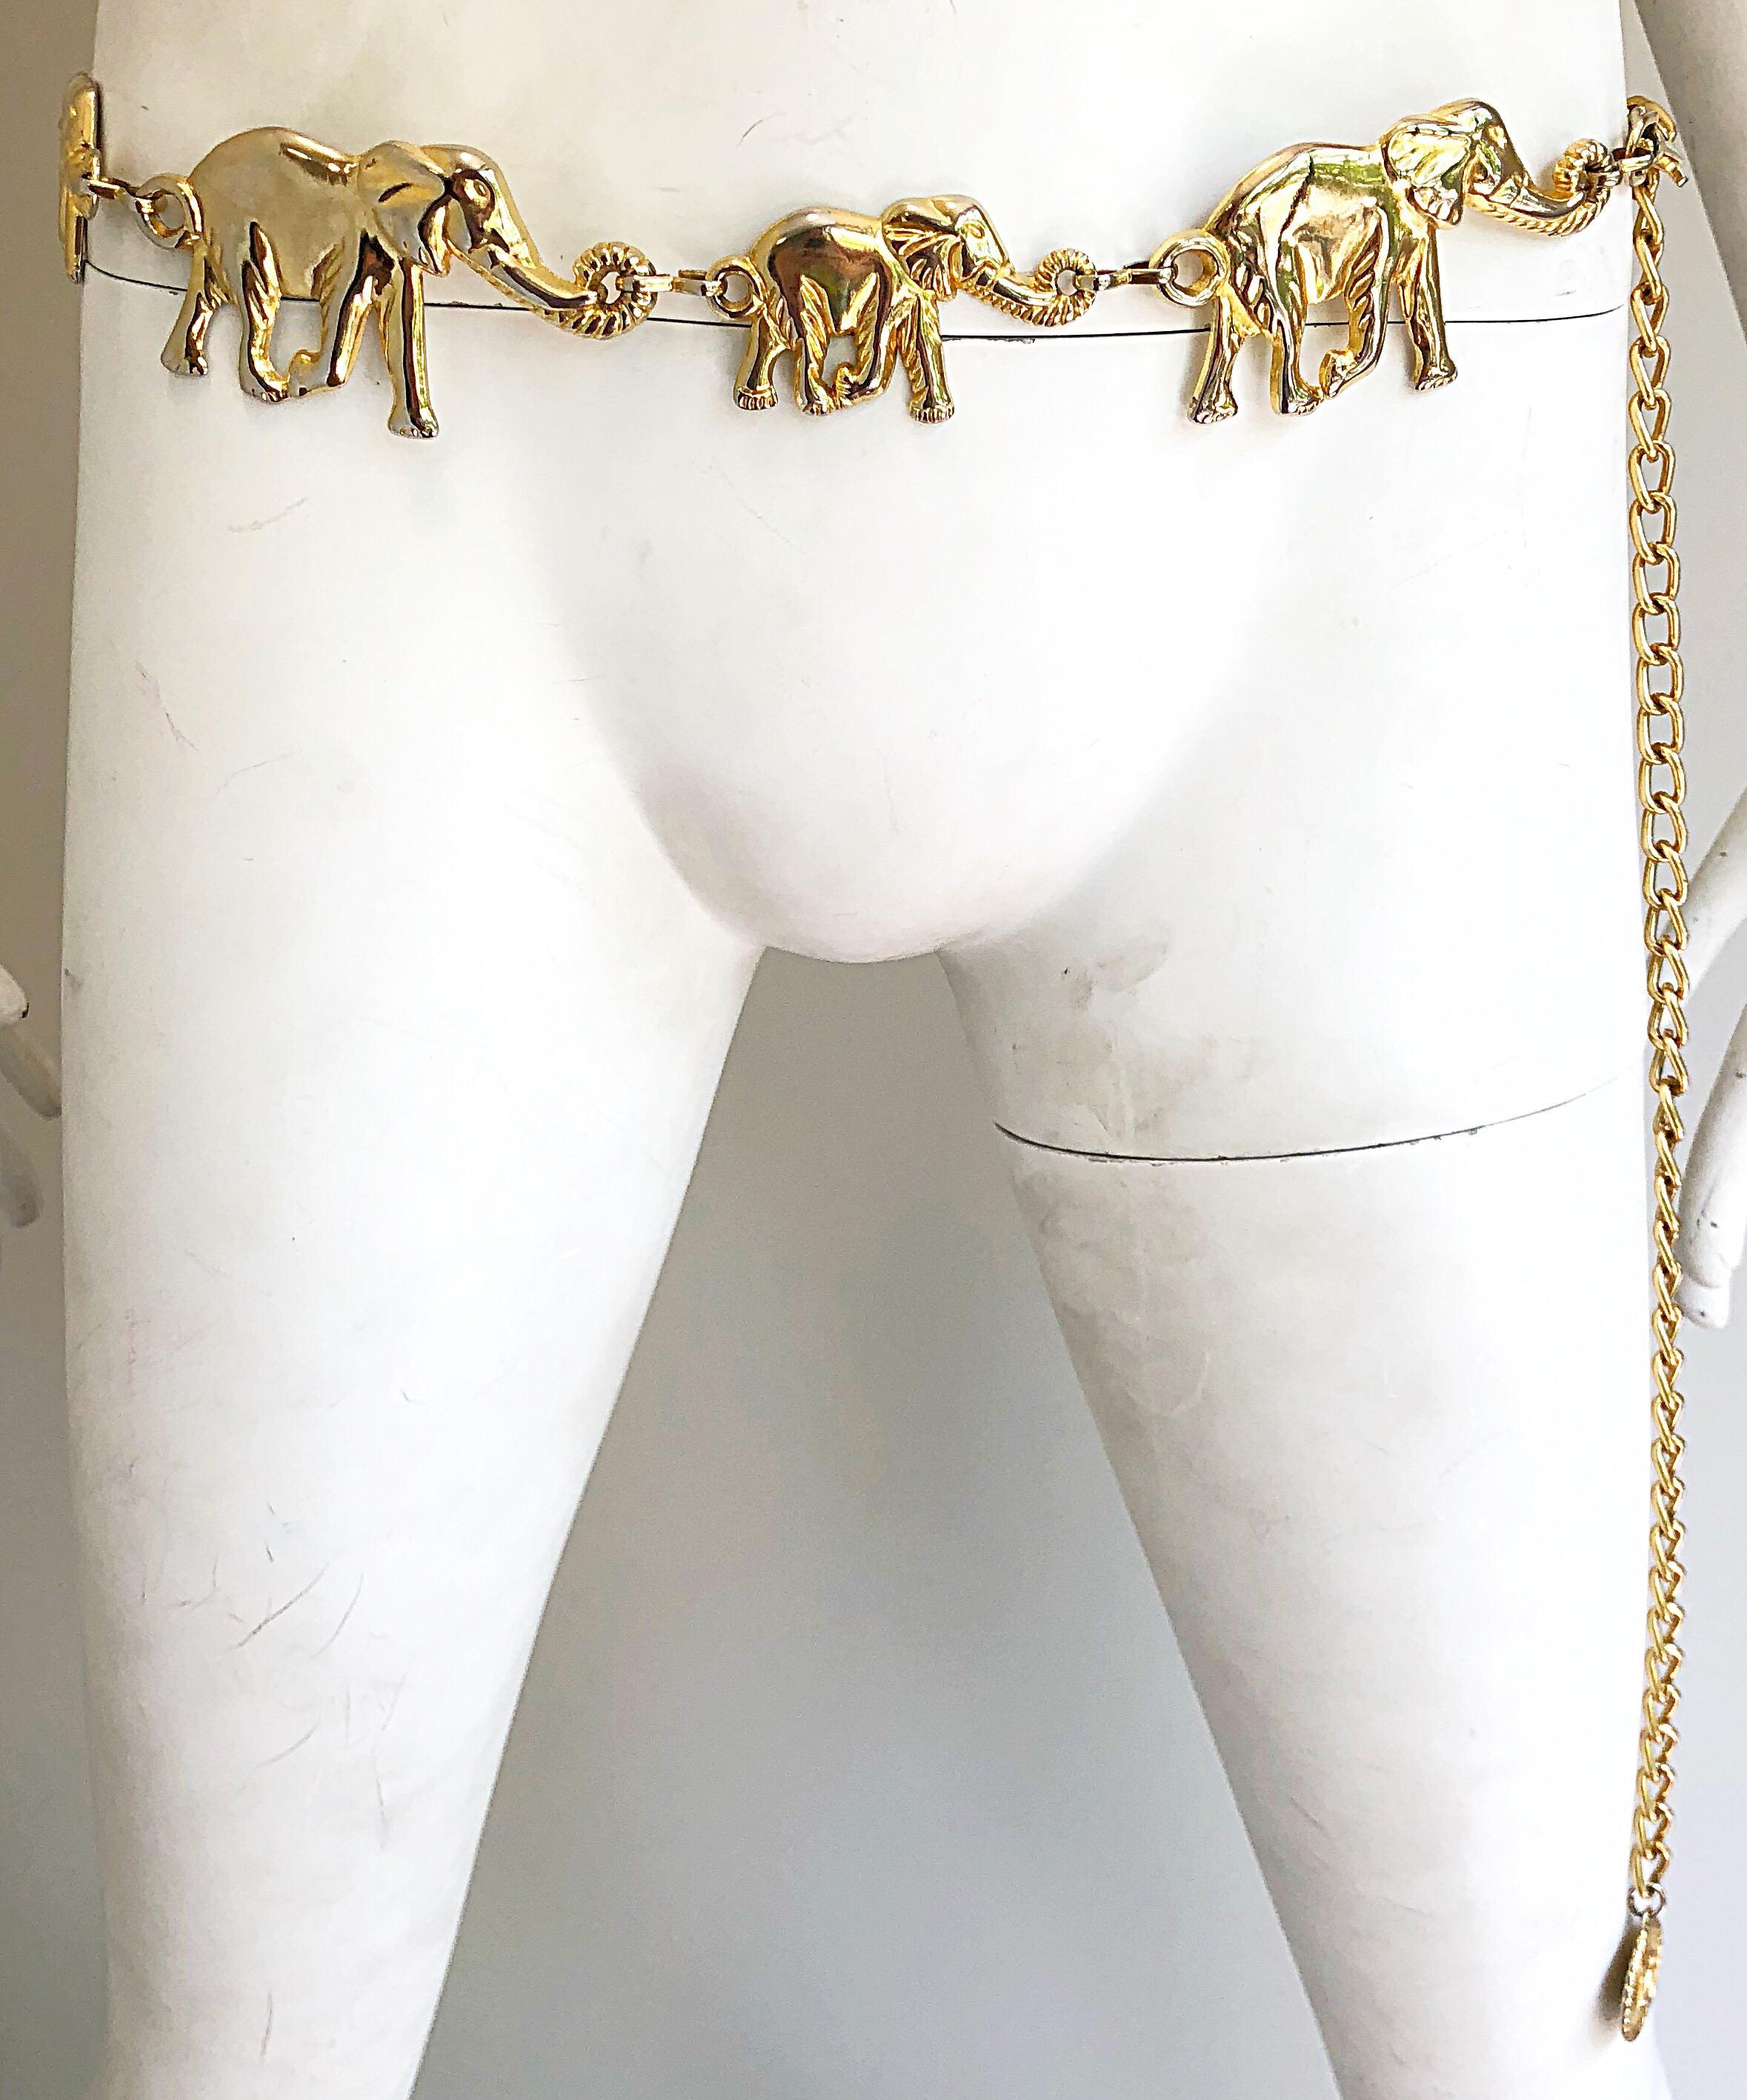 Amazing 1990s Gold Metal Elephant Novelty Vintage 90s Chain Bold Belt / Neclace For Sale 5